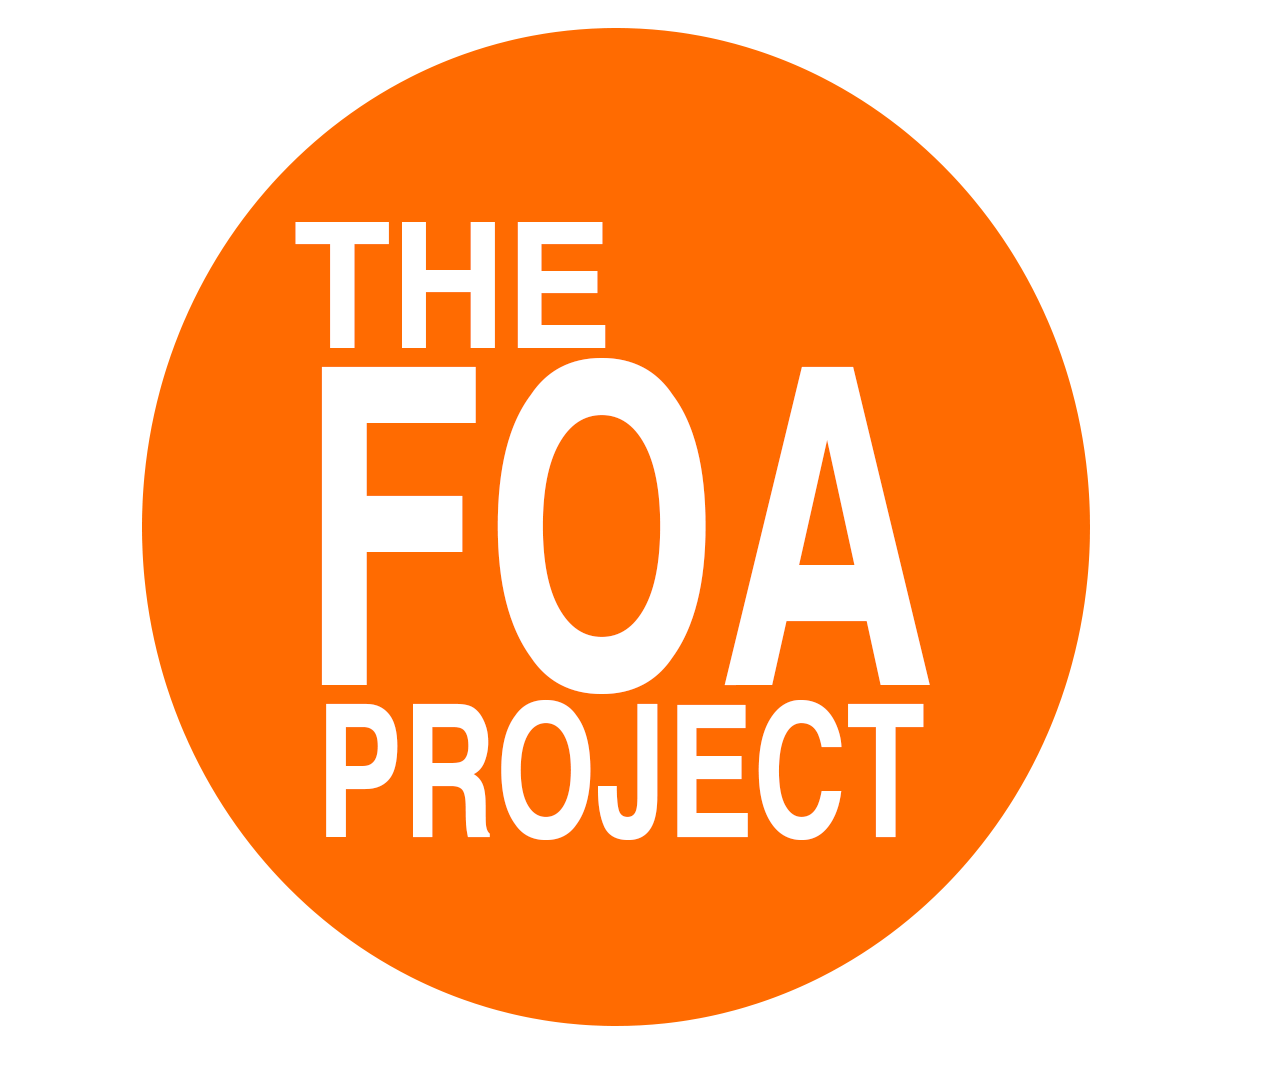 The Fiscal Openness Accelerator (FOA Project)